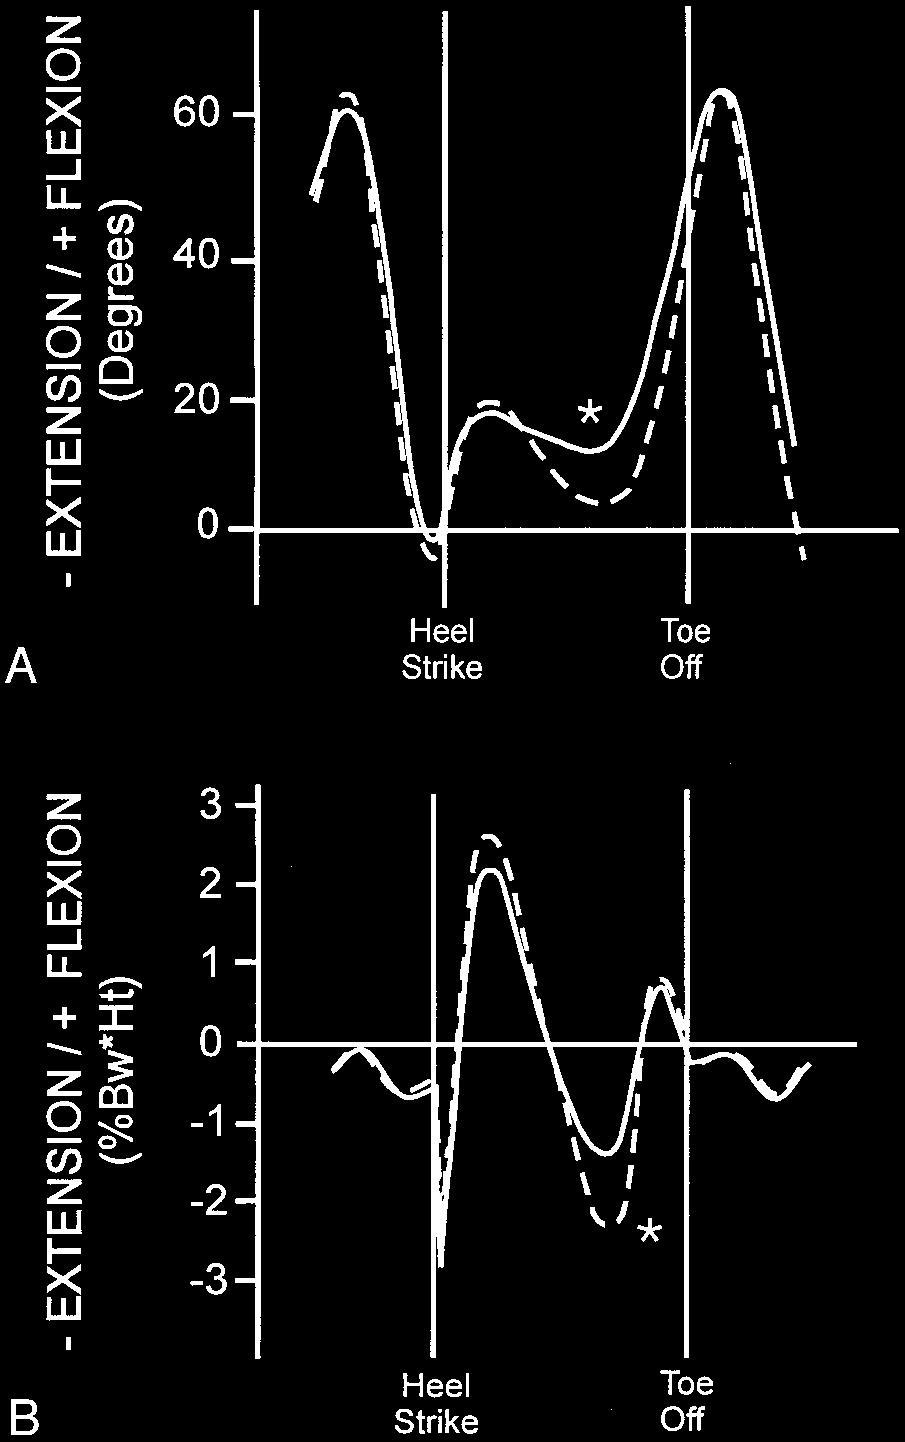 72 Patel et al. American Journal of Sports Medicine compared with the control group (Fig. 4).